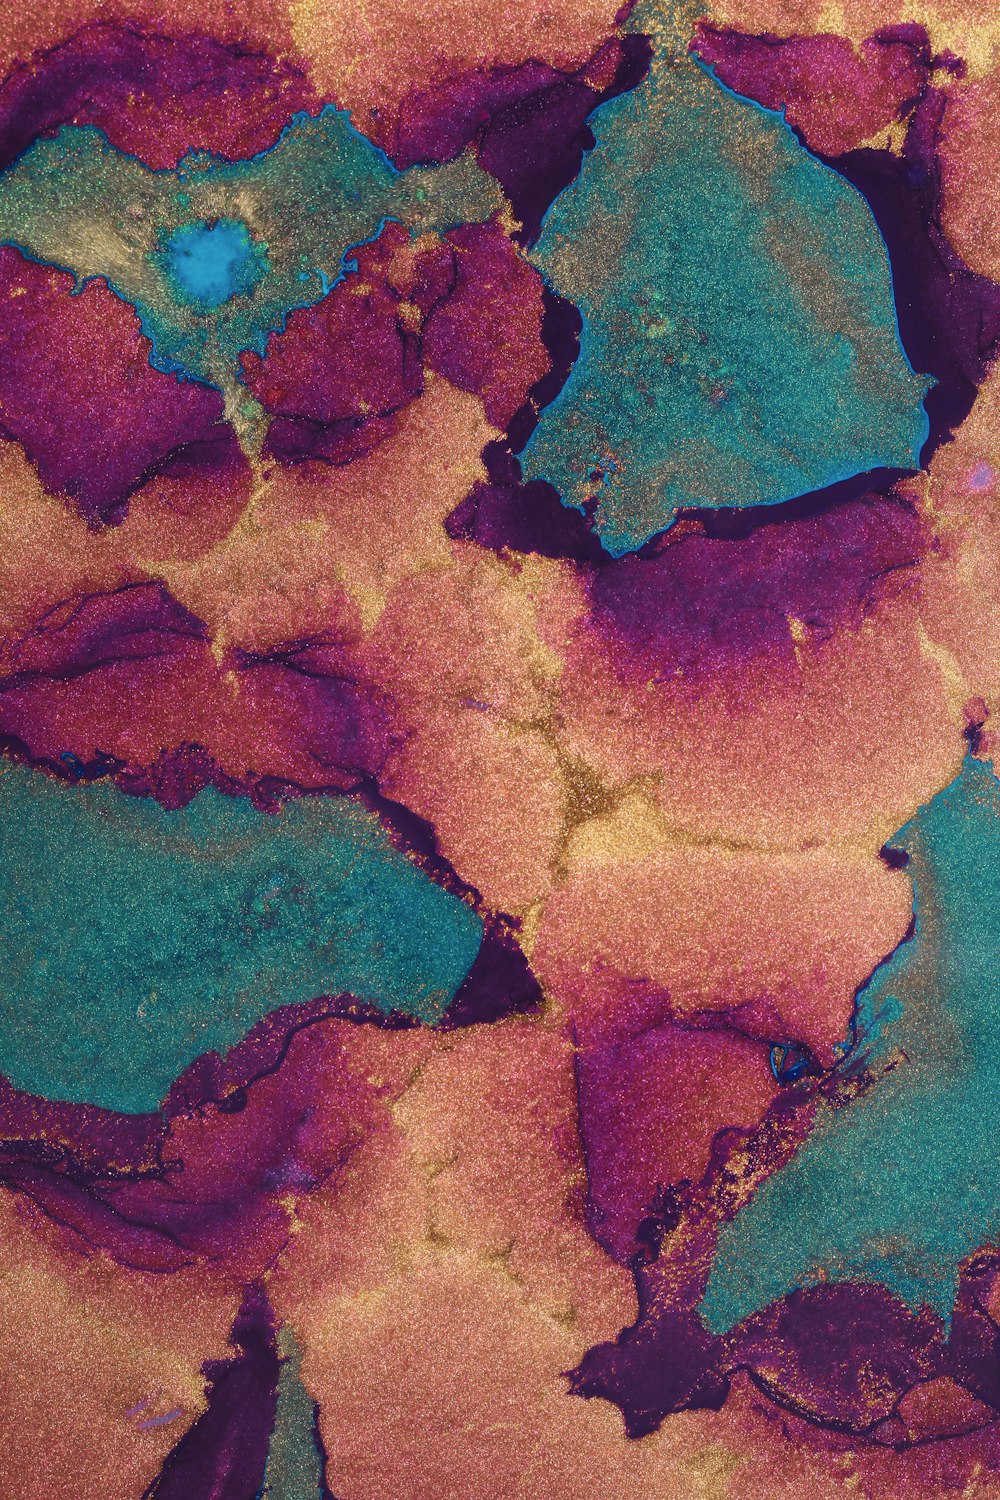 a close up of a colorful rock